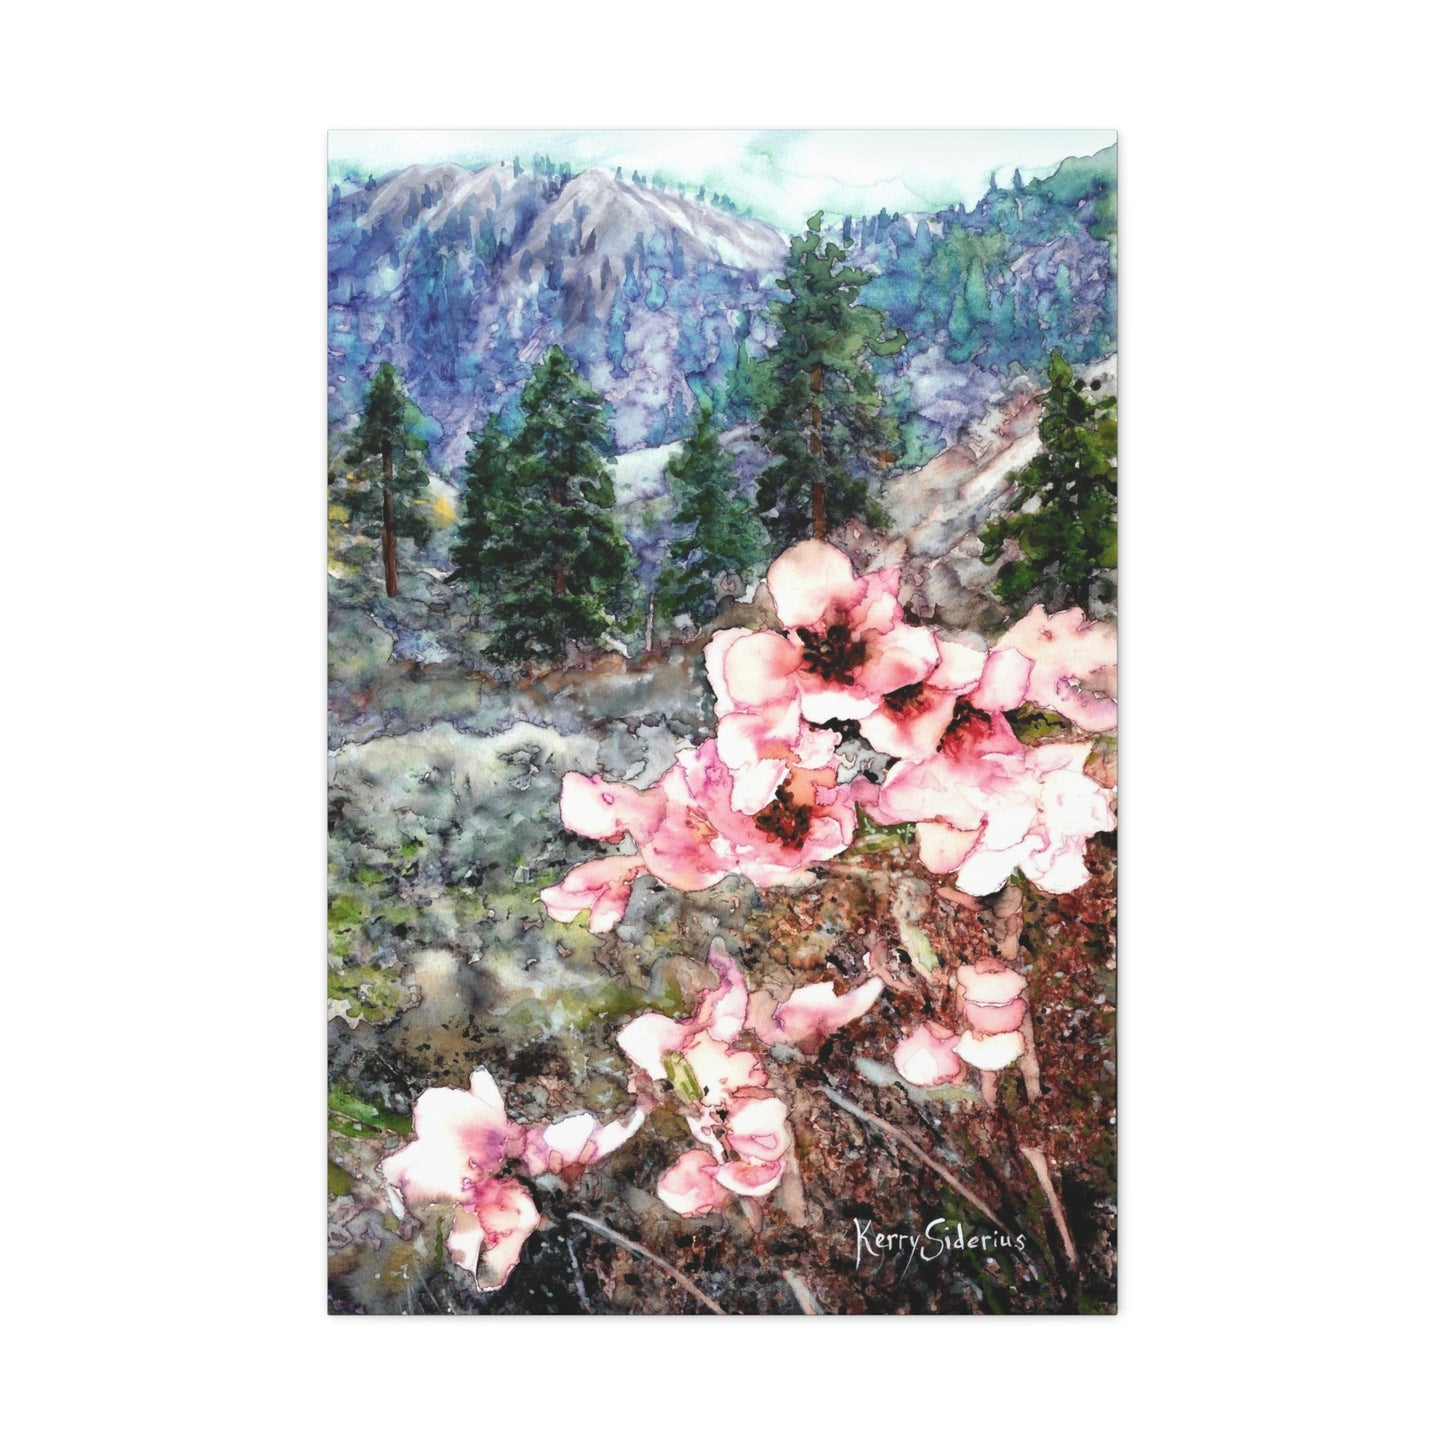 "Wild Apricot Blossoms Up Canyon" Gallery Wrapped Canvas - Kerry Siderius Art 